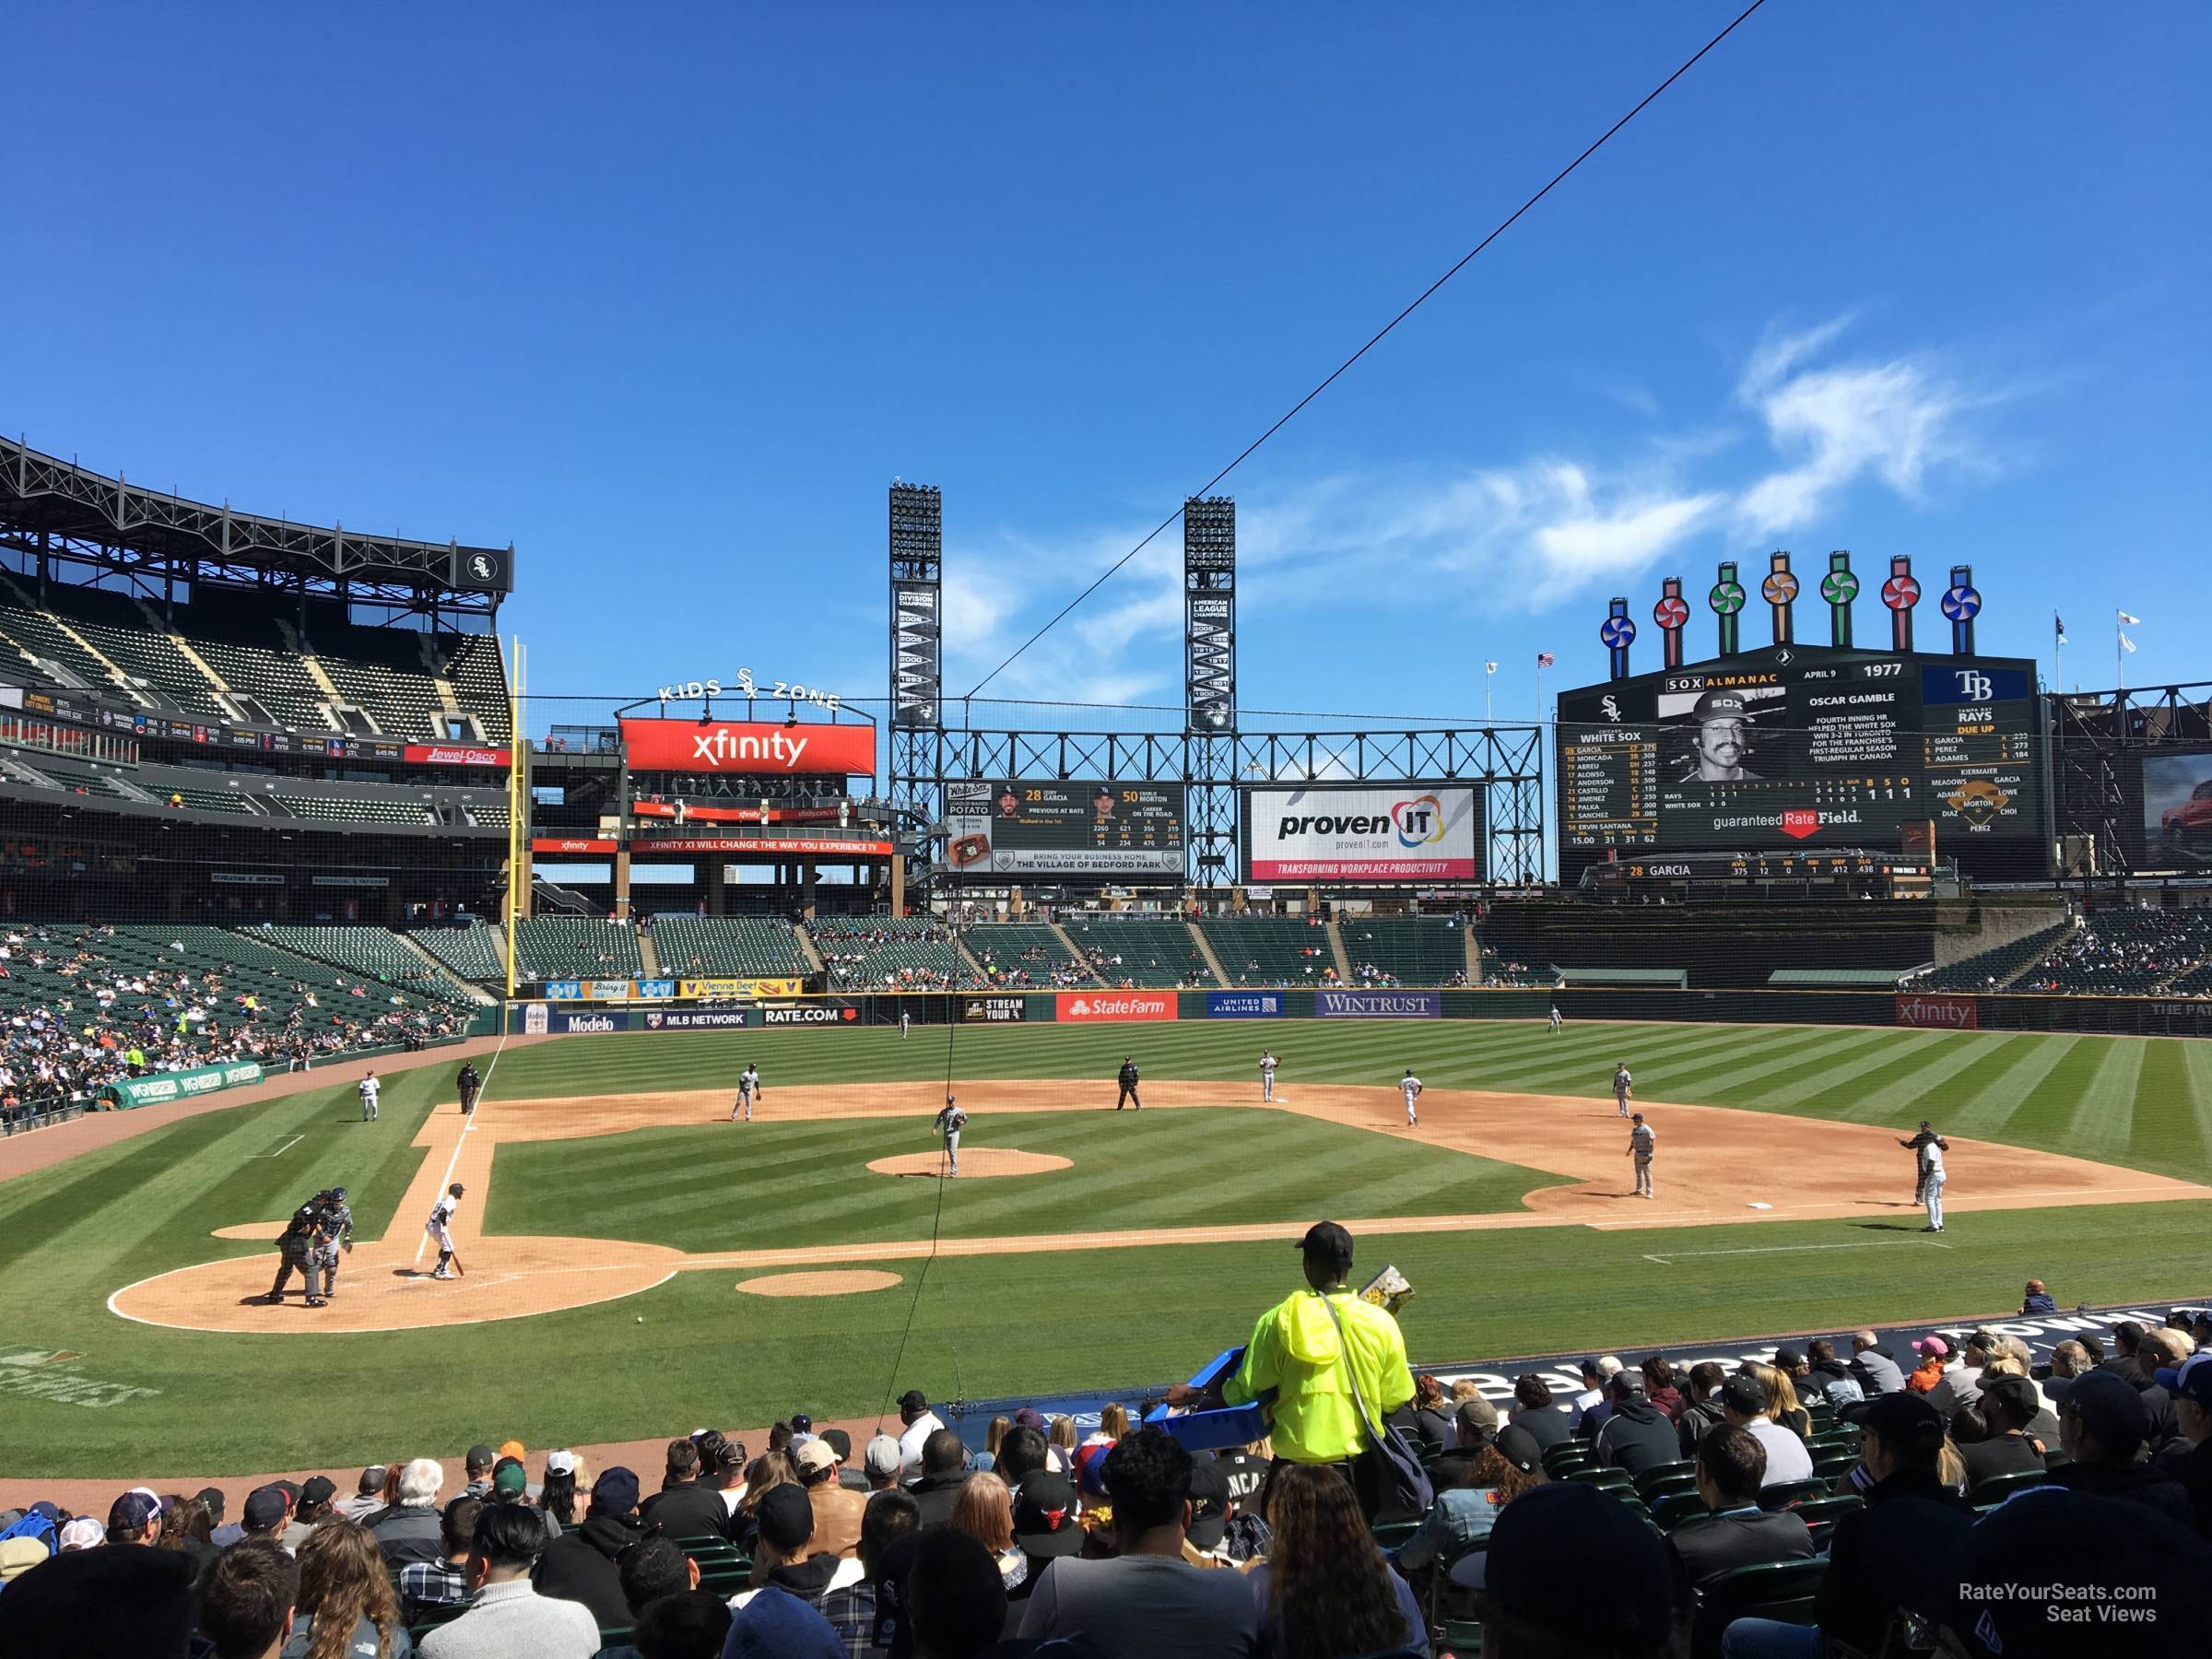 section 128, row 25 seat view  - guaranteed rate field